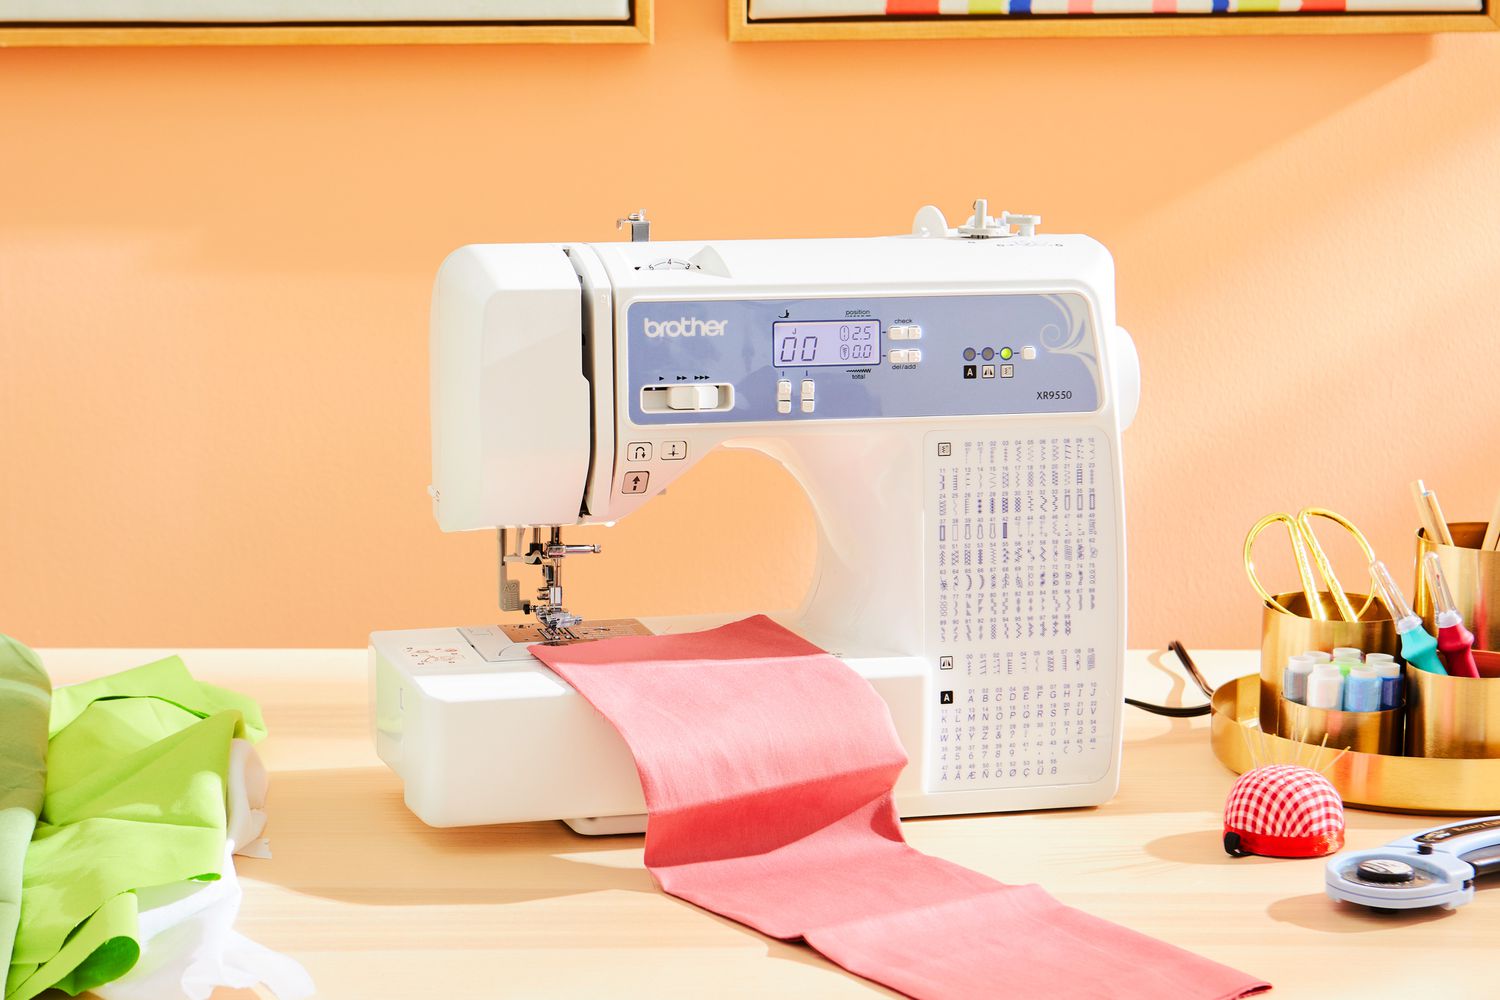 how to sew